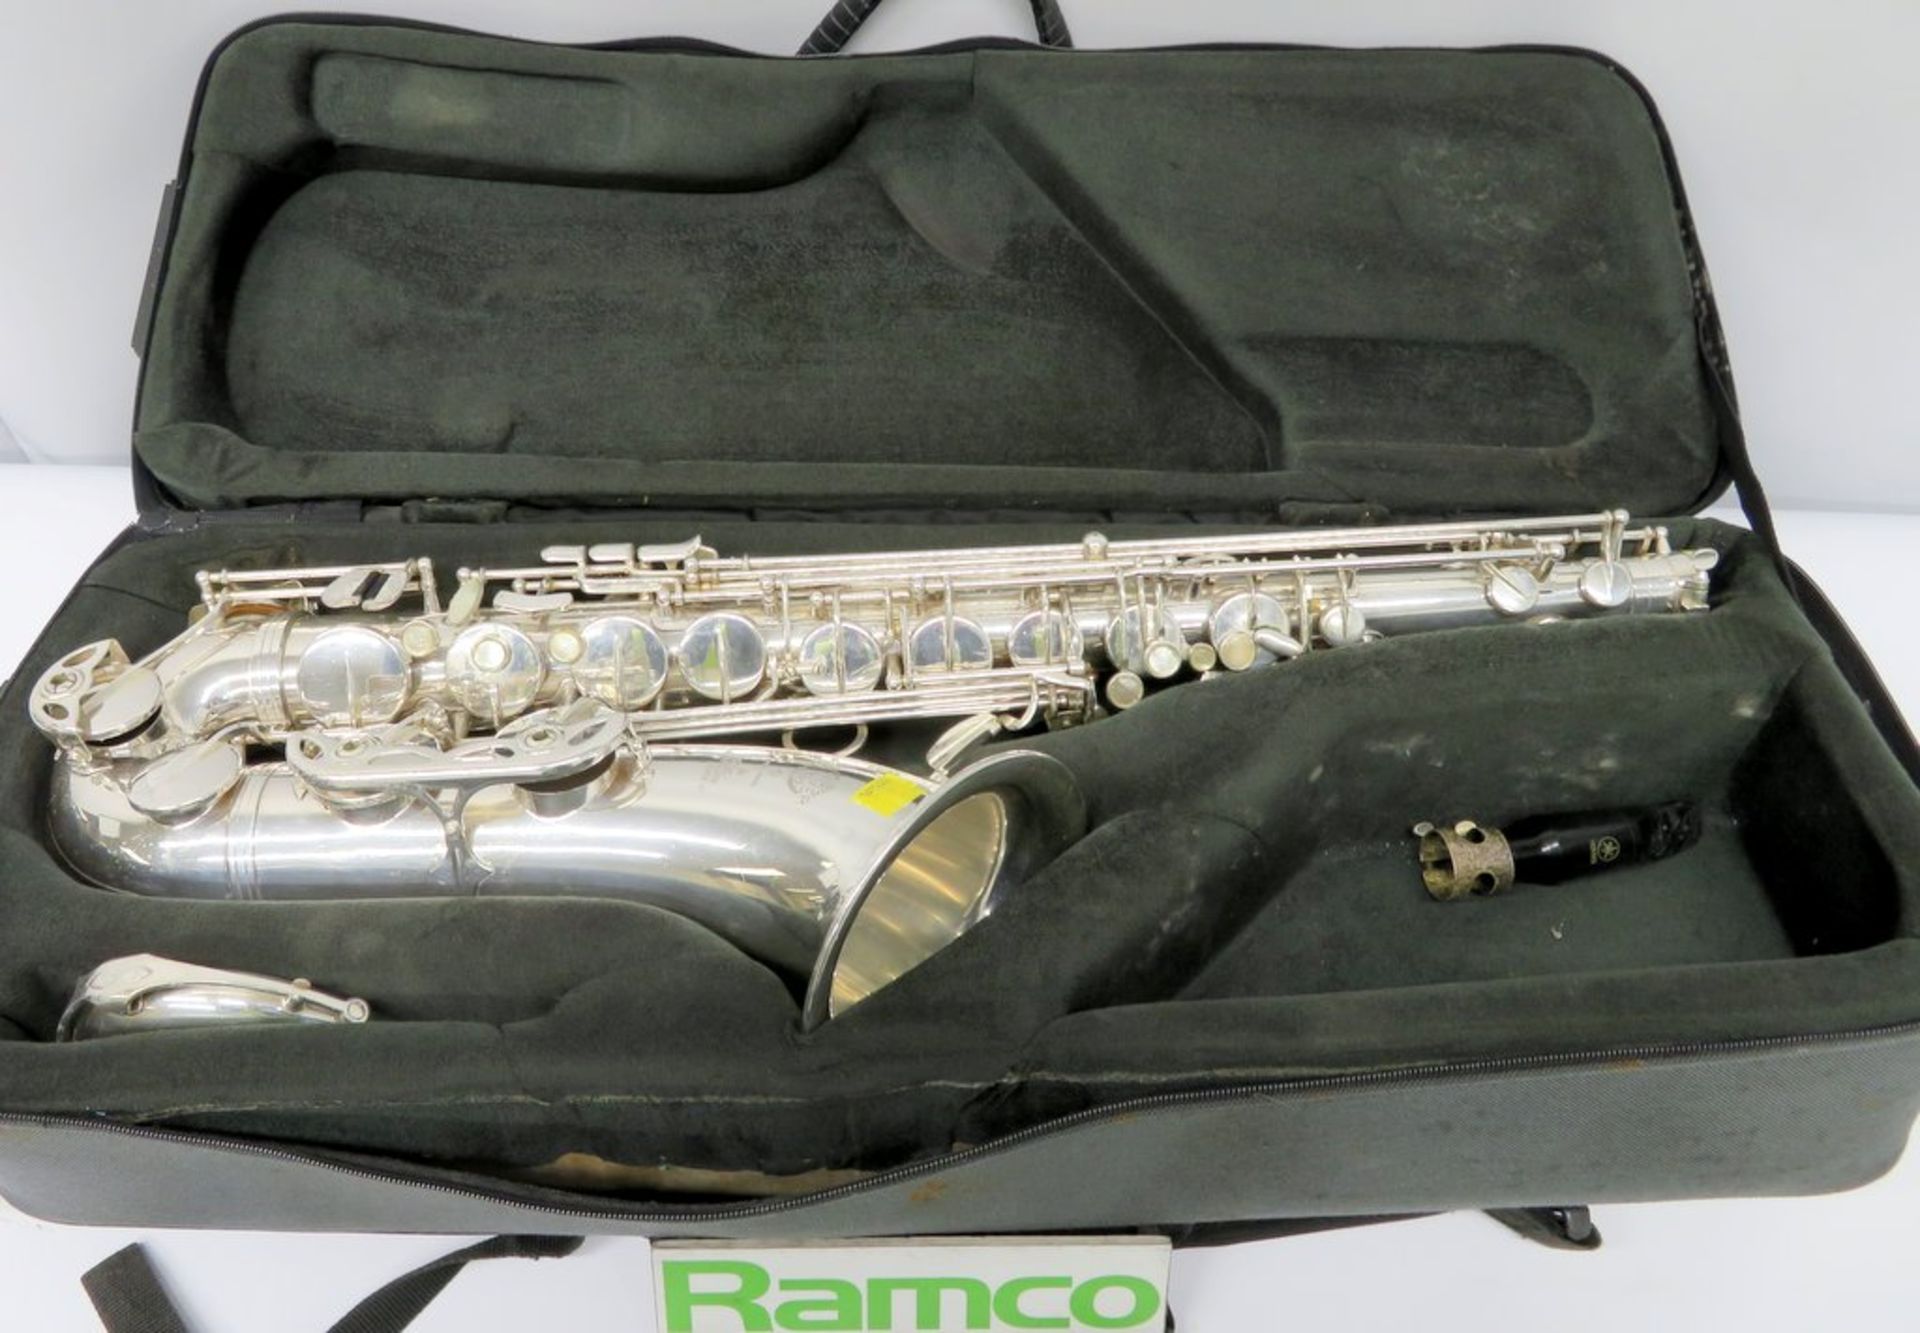 Henri Selmer Super Action 80 Serie 2 Tenor Saxophone Complete With Case.